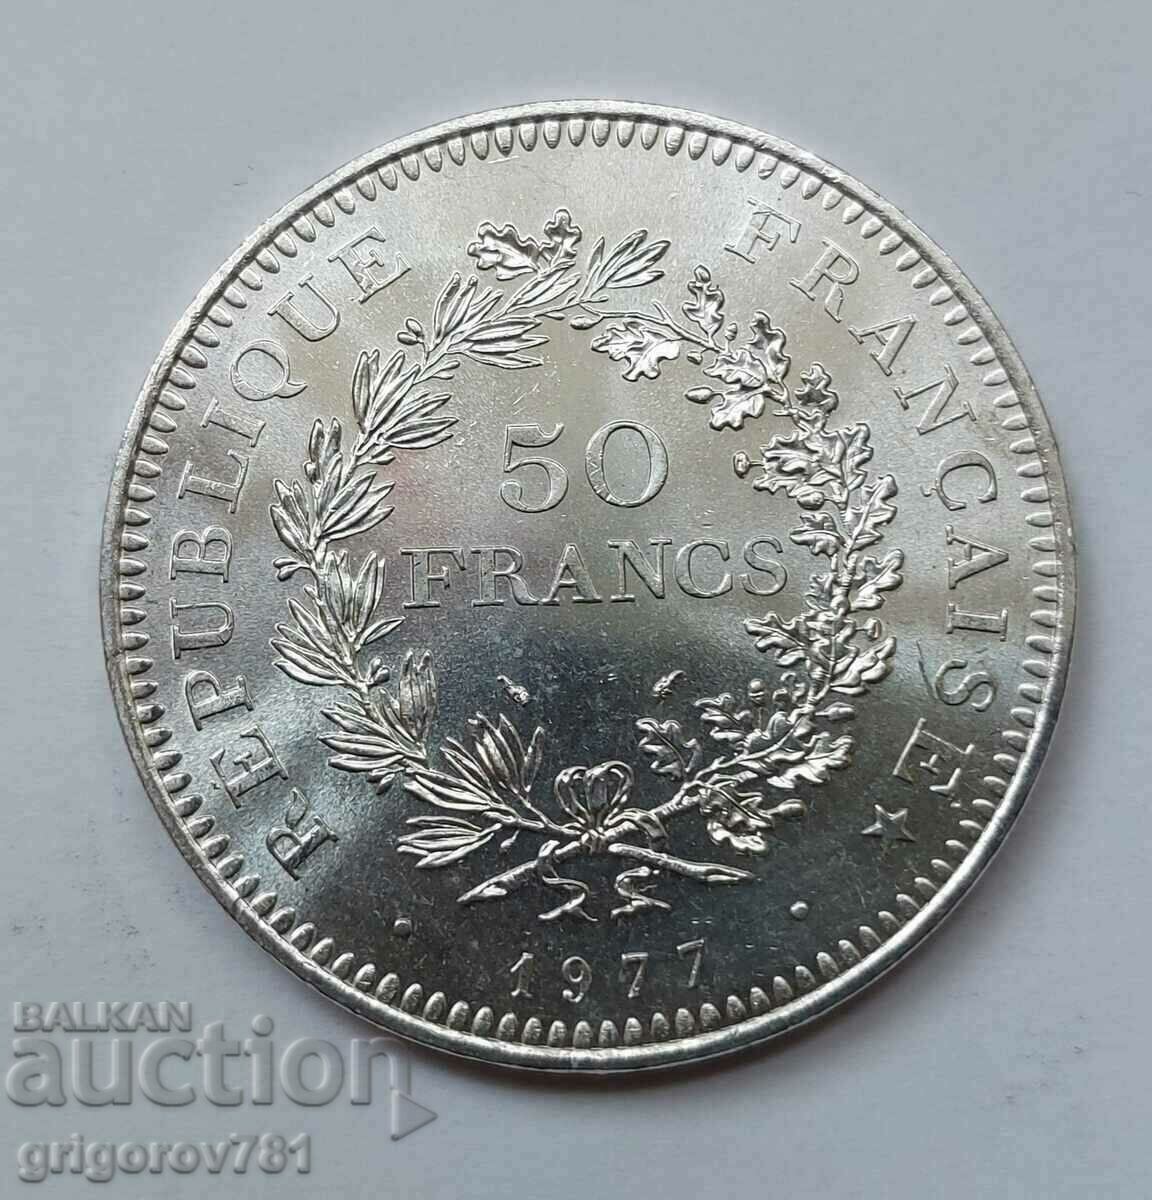 50 Francs Silver France 1977 - Silver Coin #2